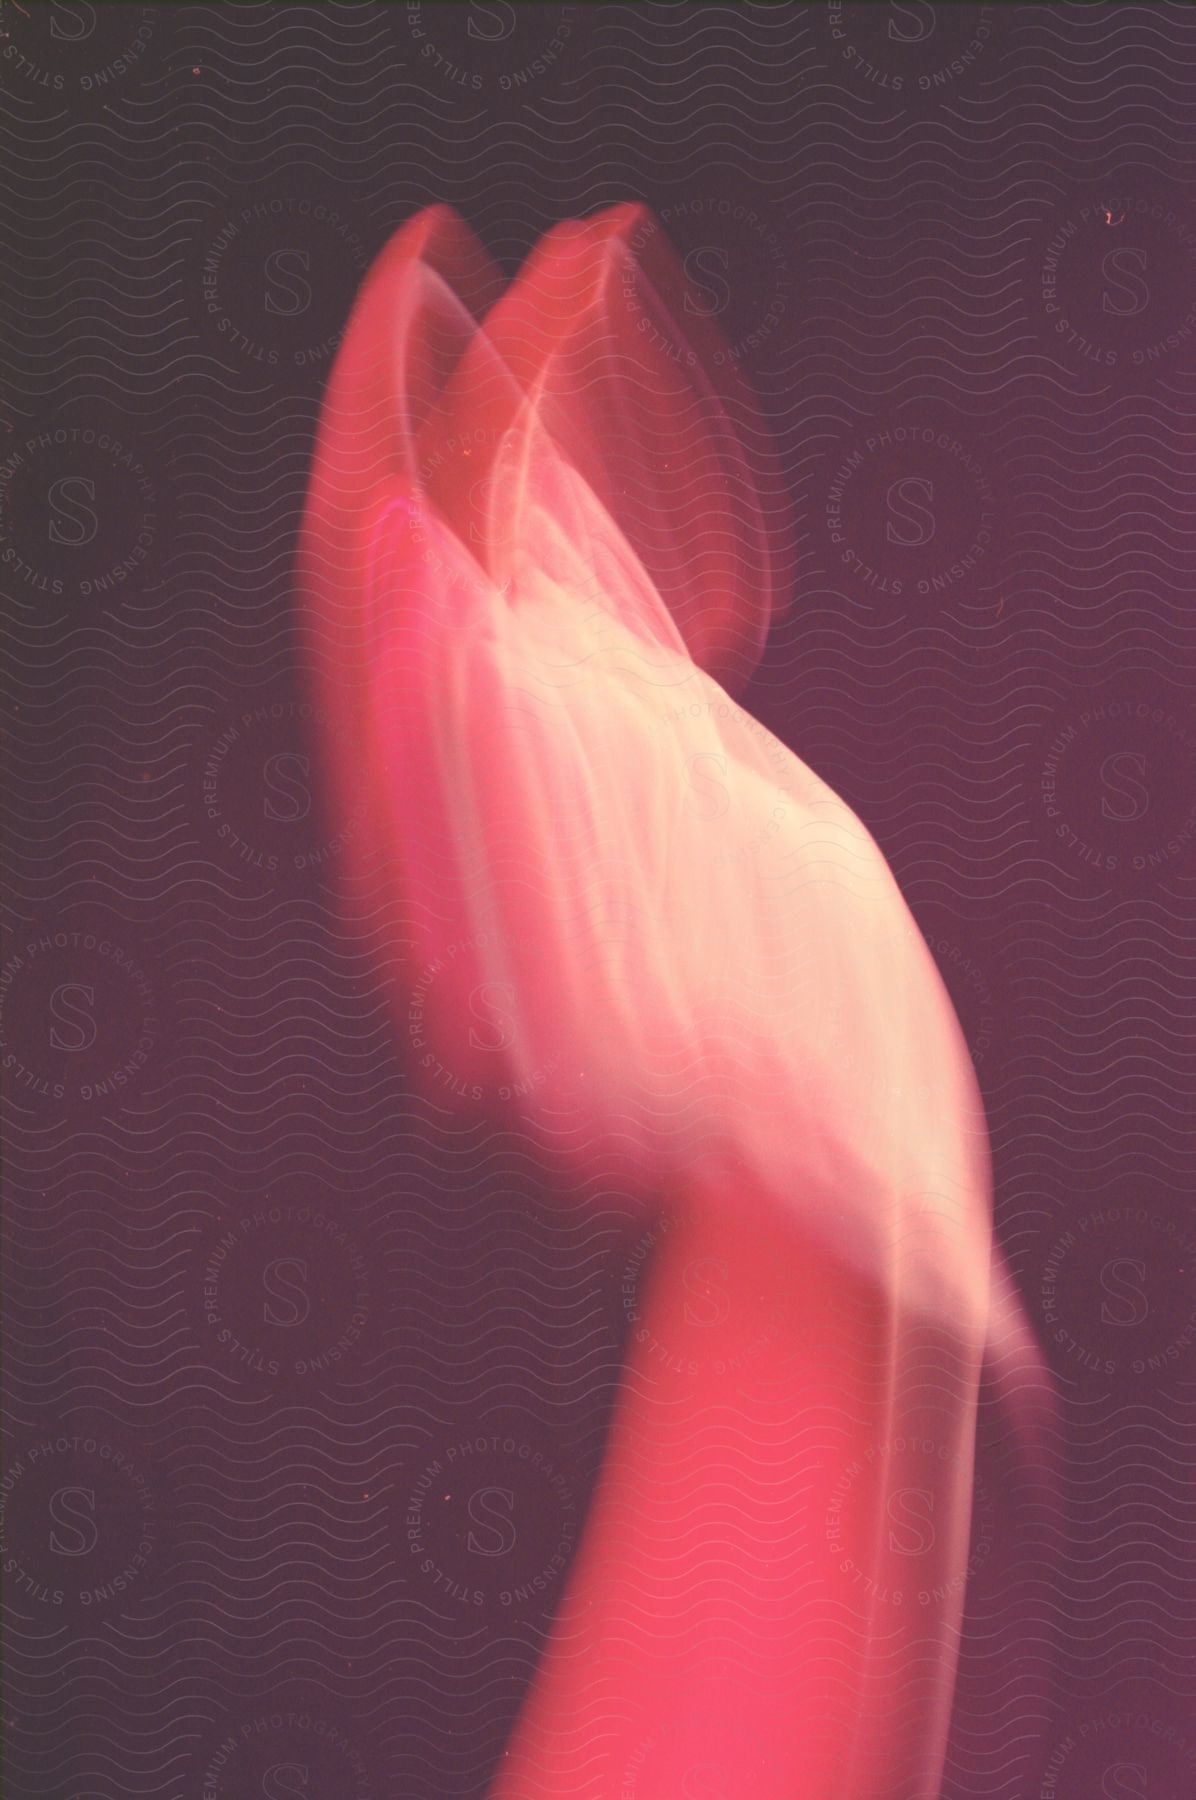 A hand waving back in long exposure under a red filter light against a darker background